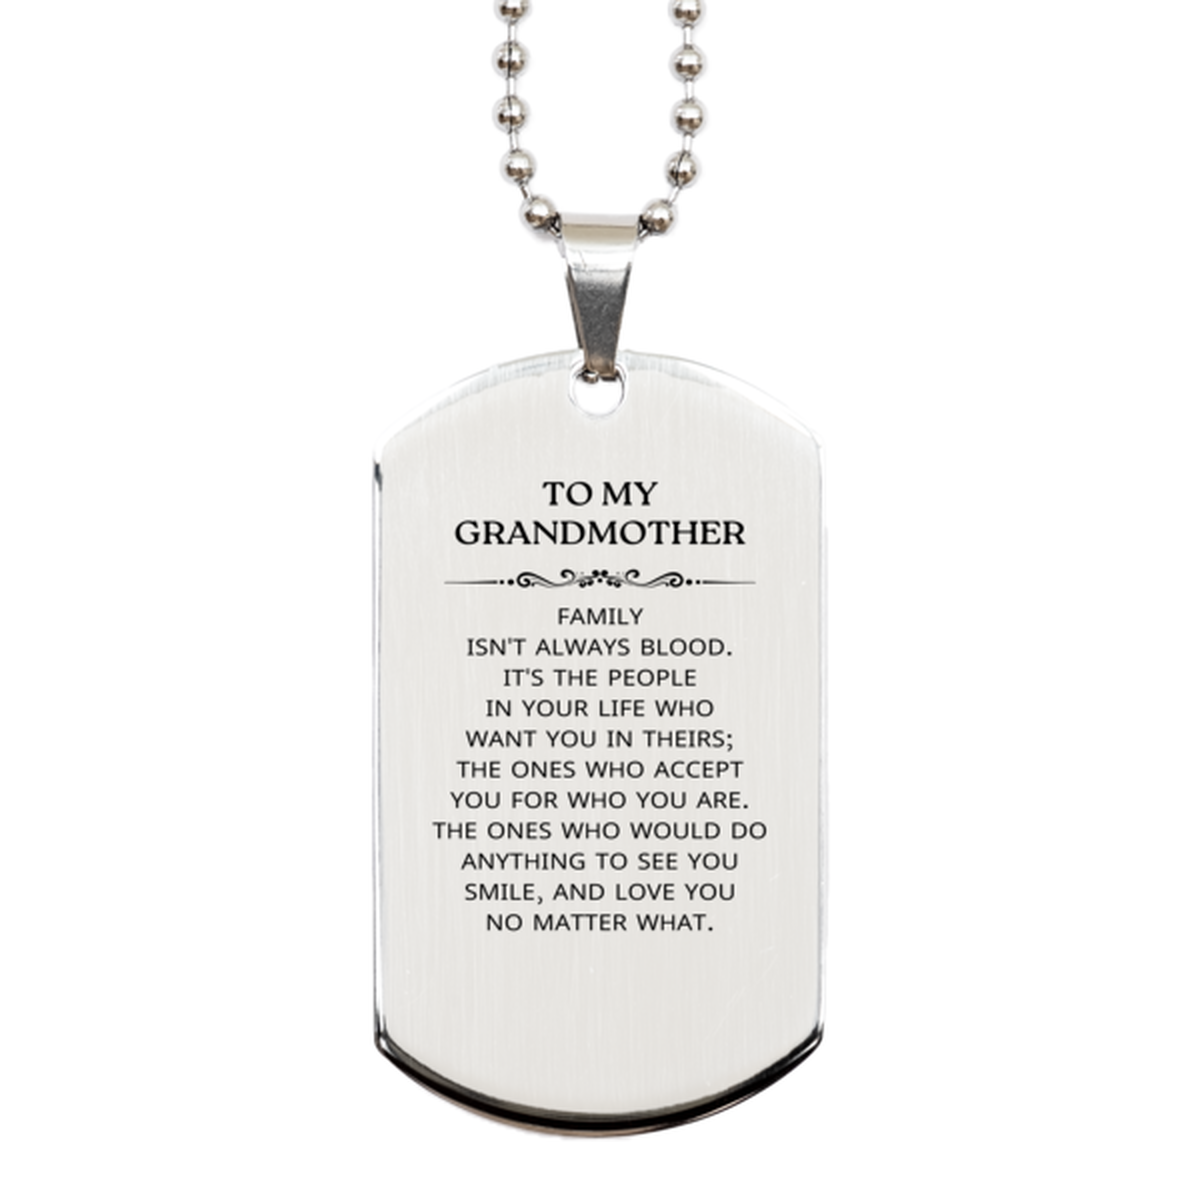 To My Grandmother Gifts, Family isn't always blood, Grandmother Silver Dog Tag, Birthday Christmas Unique Present For Grandmother